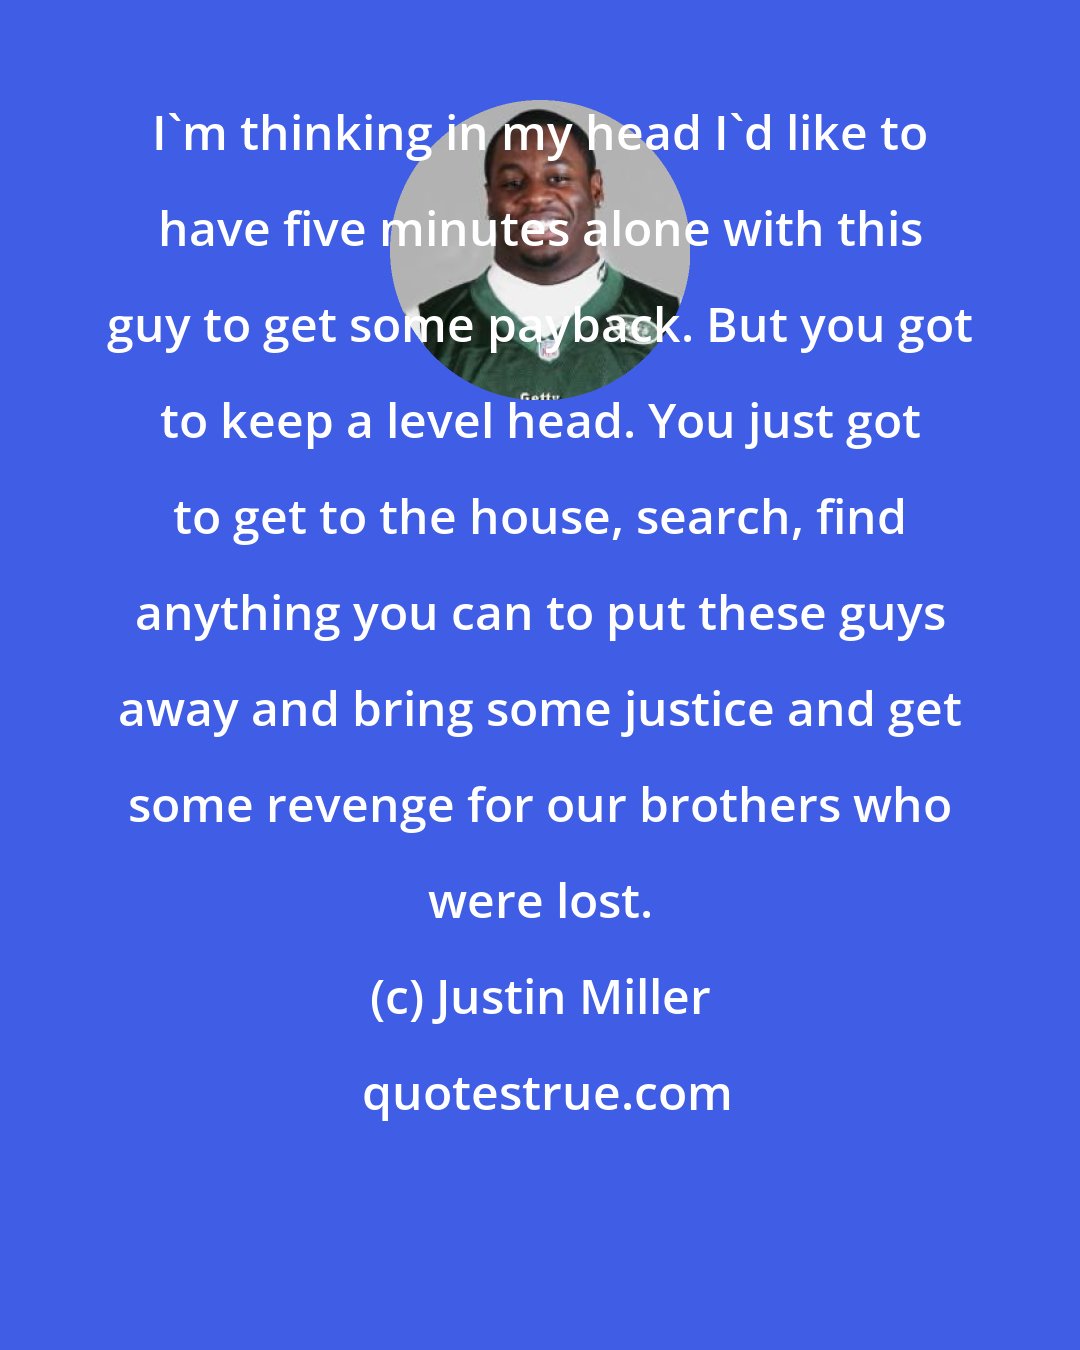 Justin Miller: I'm thinking in my head I'd like to have five minutes alone with this guy to get some payback. But you got to keep a level head. You just got to get to the house, search, find anything you can to put these guys away and bring some justice and get some revenge for our brothers who were lost.